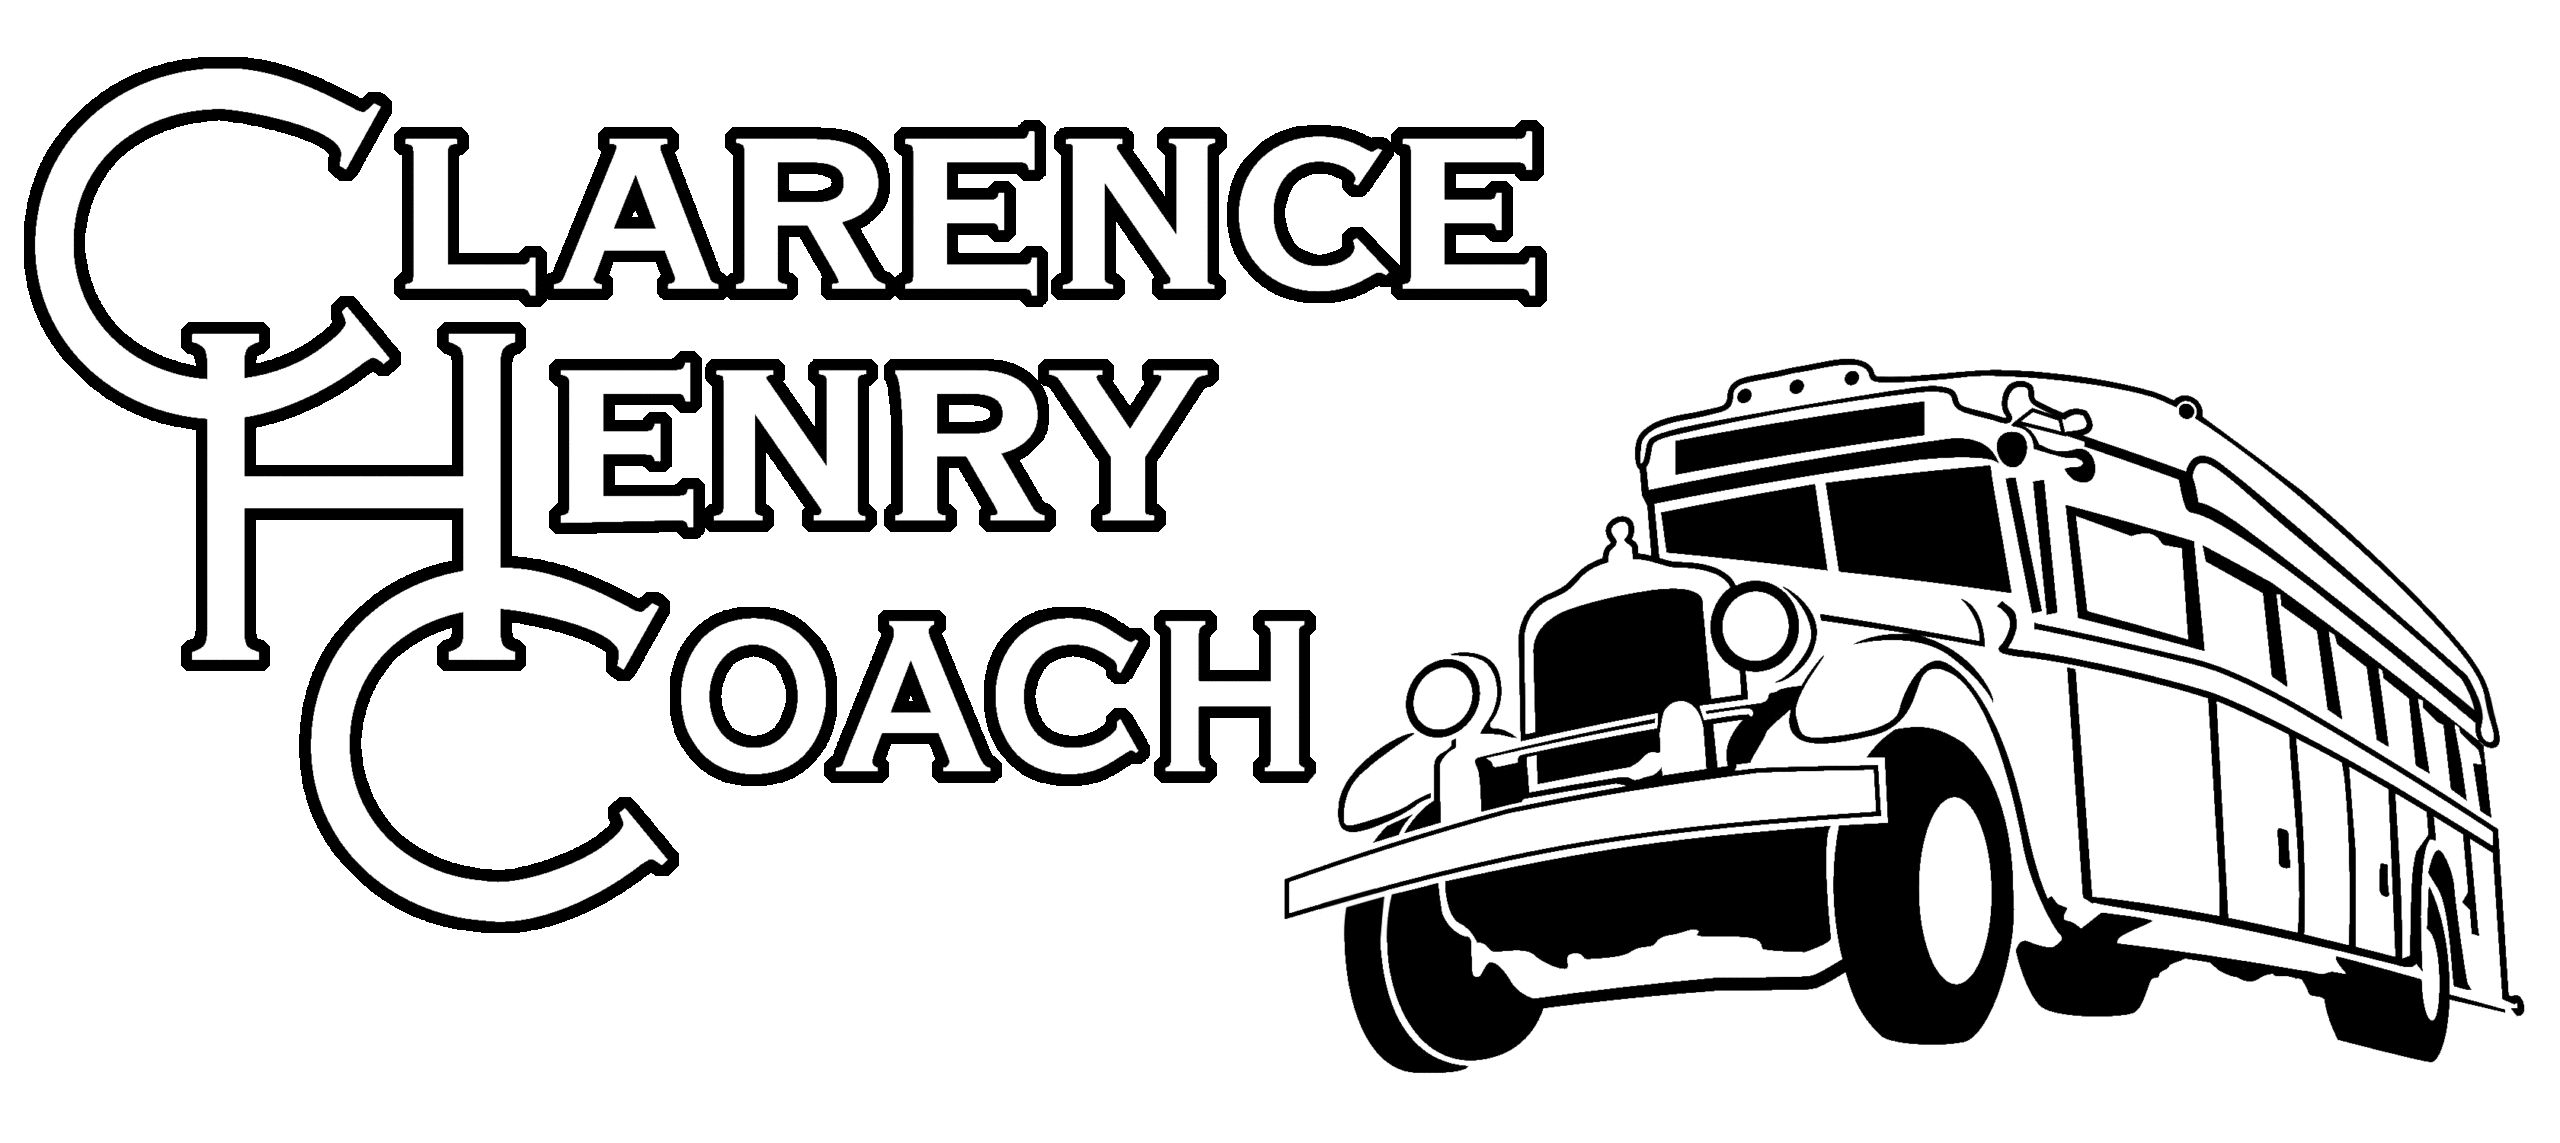 Clarence Henry Logo